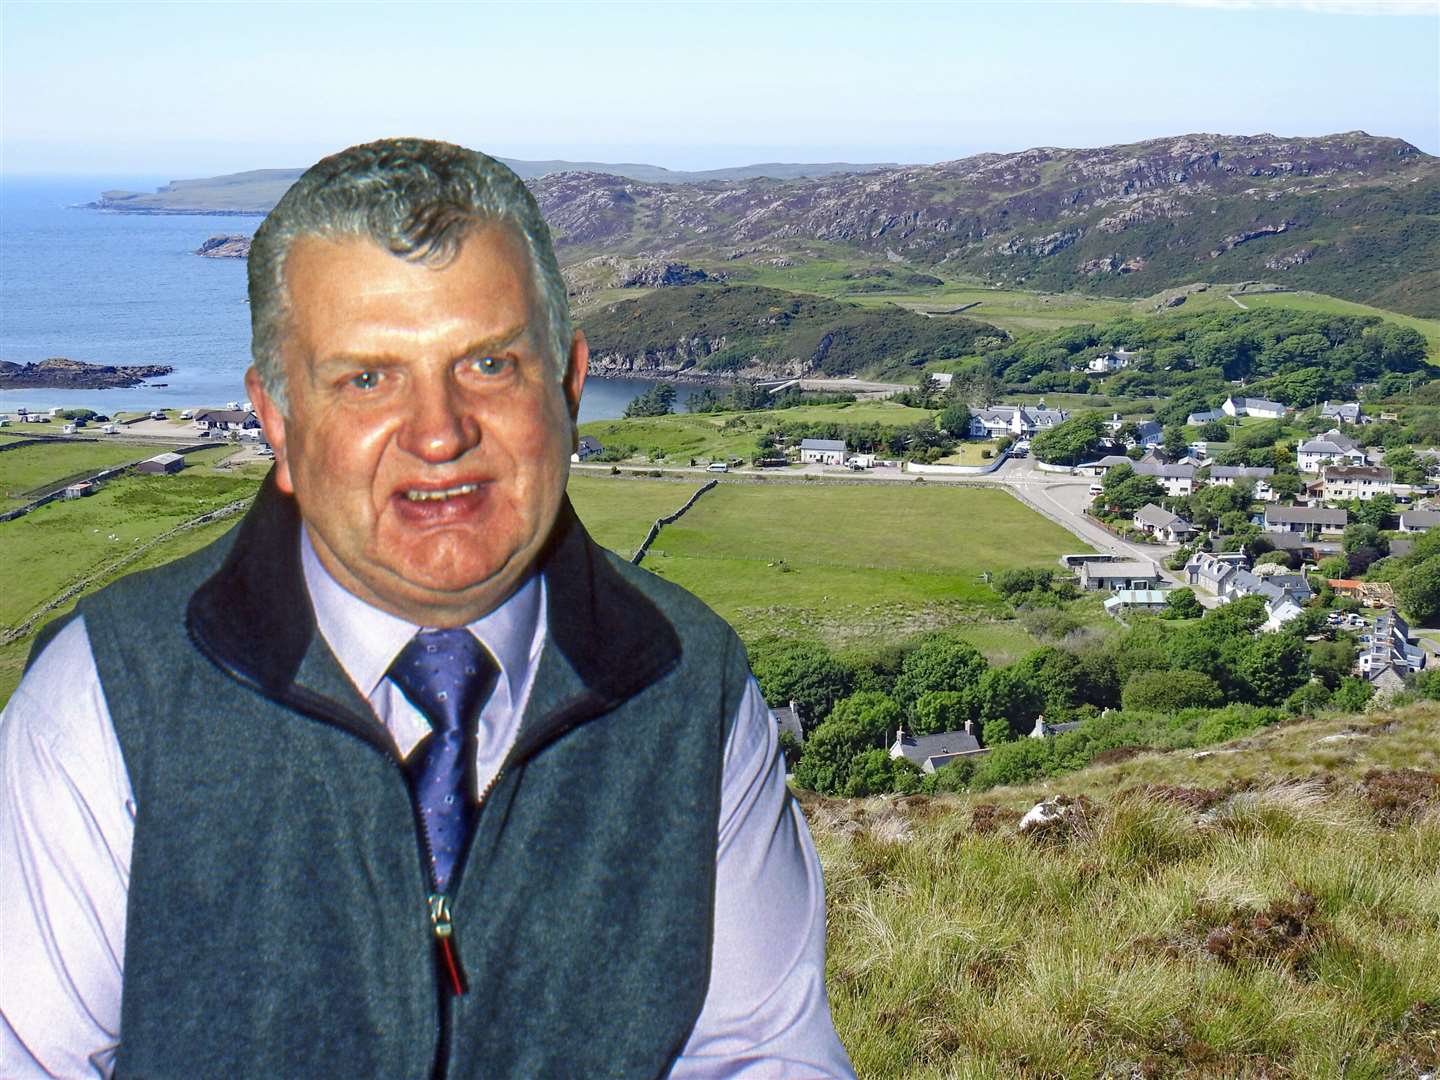 This image of Andrew Mackay is superimposed on a shot of his native Scourie.